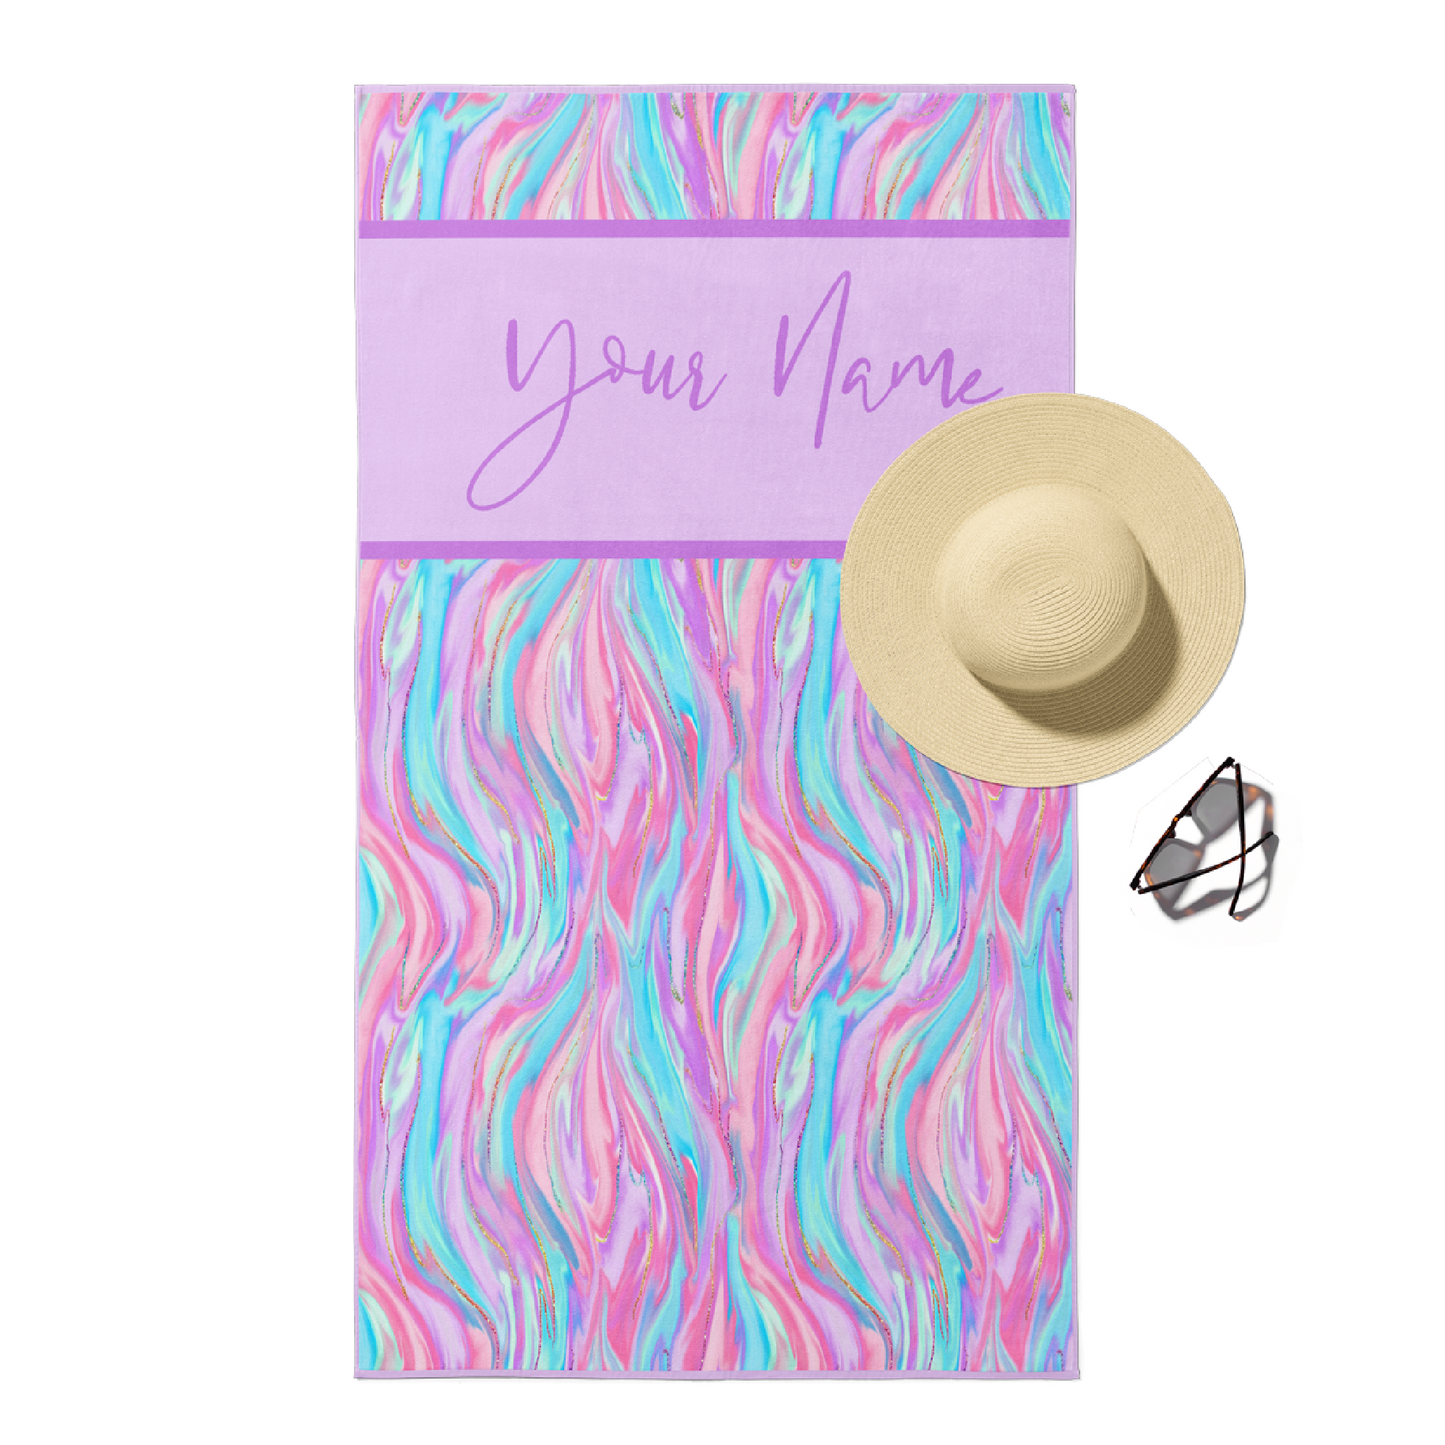 Beach towel in blue, Pink, and purple tie dye swirl with customizable purple text.